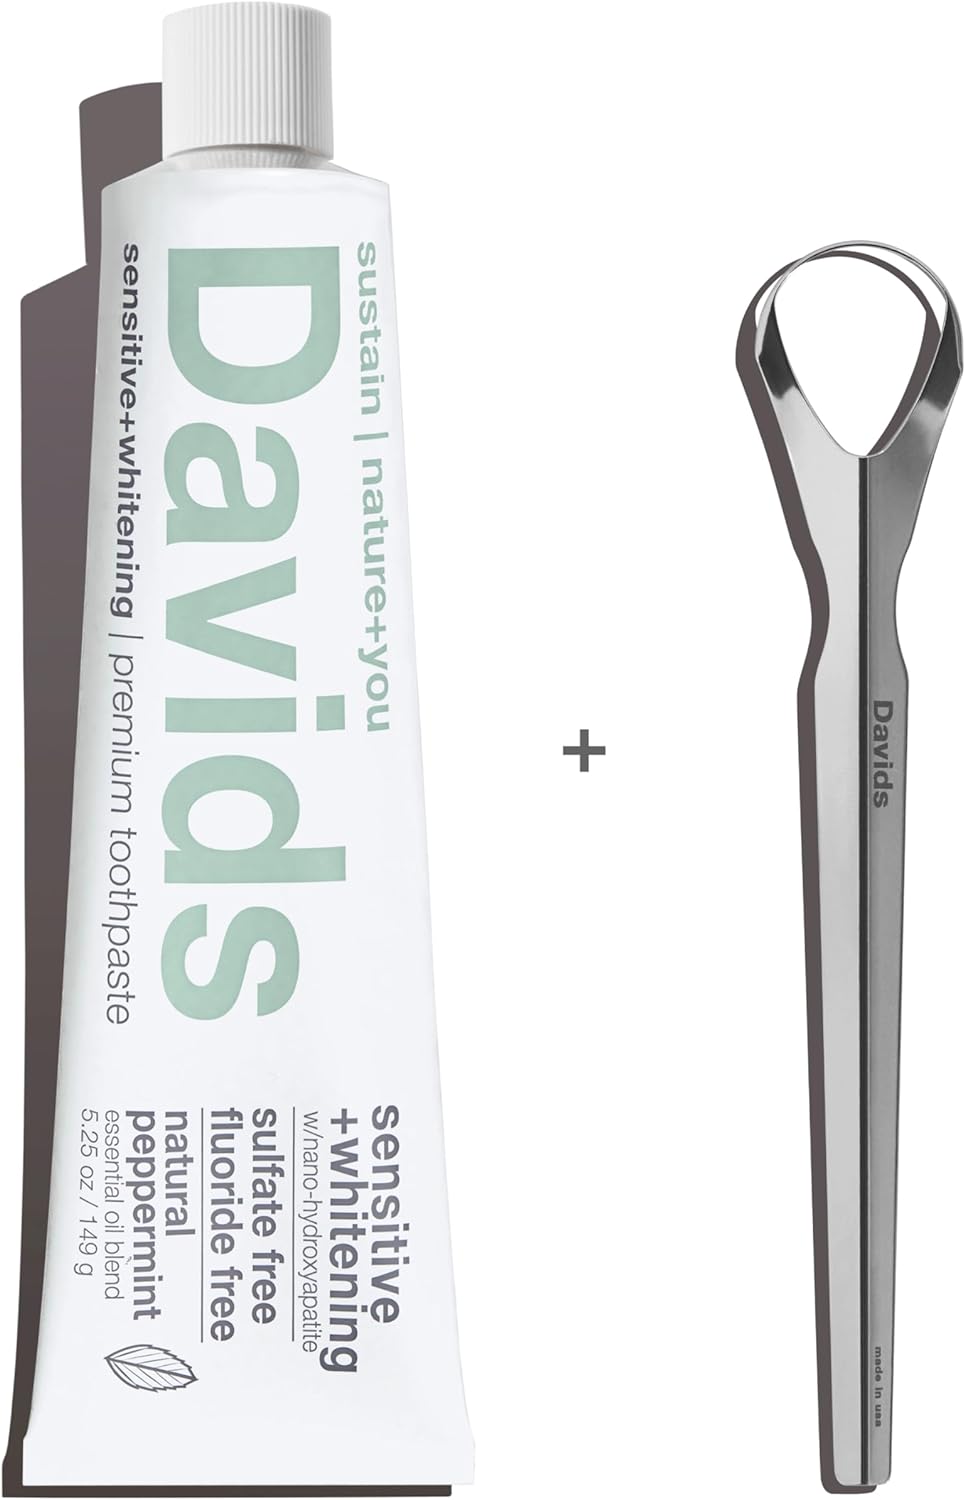 Davids Nano Hydroxyapatite Toothpaste and Tongue Scraper Bundle, Remineralize Enamel, Sensitive Relief & Teeth Whitening - Antiplaque, Fluoride Free, SLS Free, Peppermint, 5.25oz, Made in USA